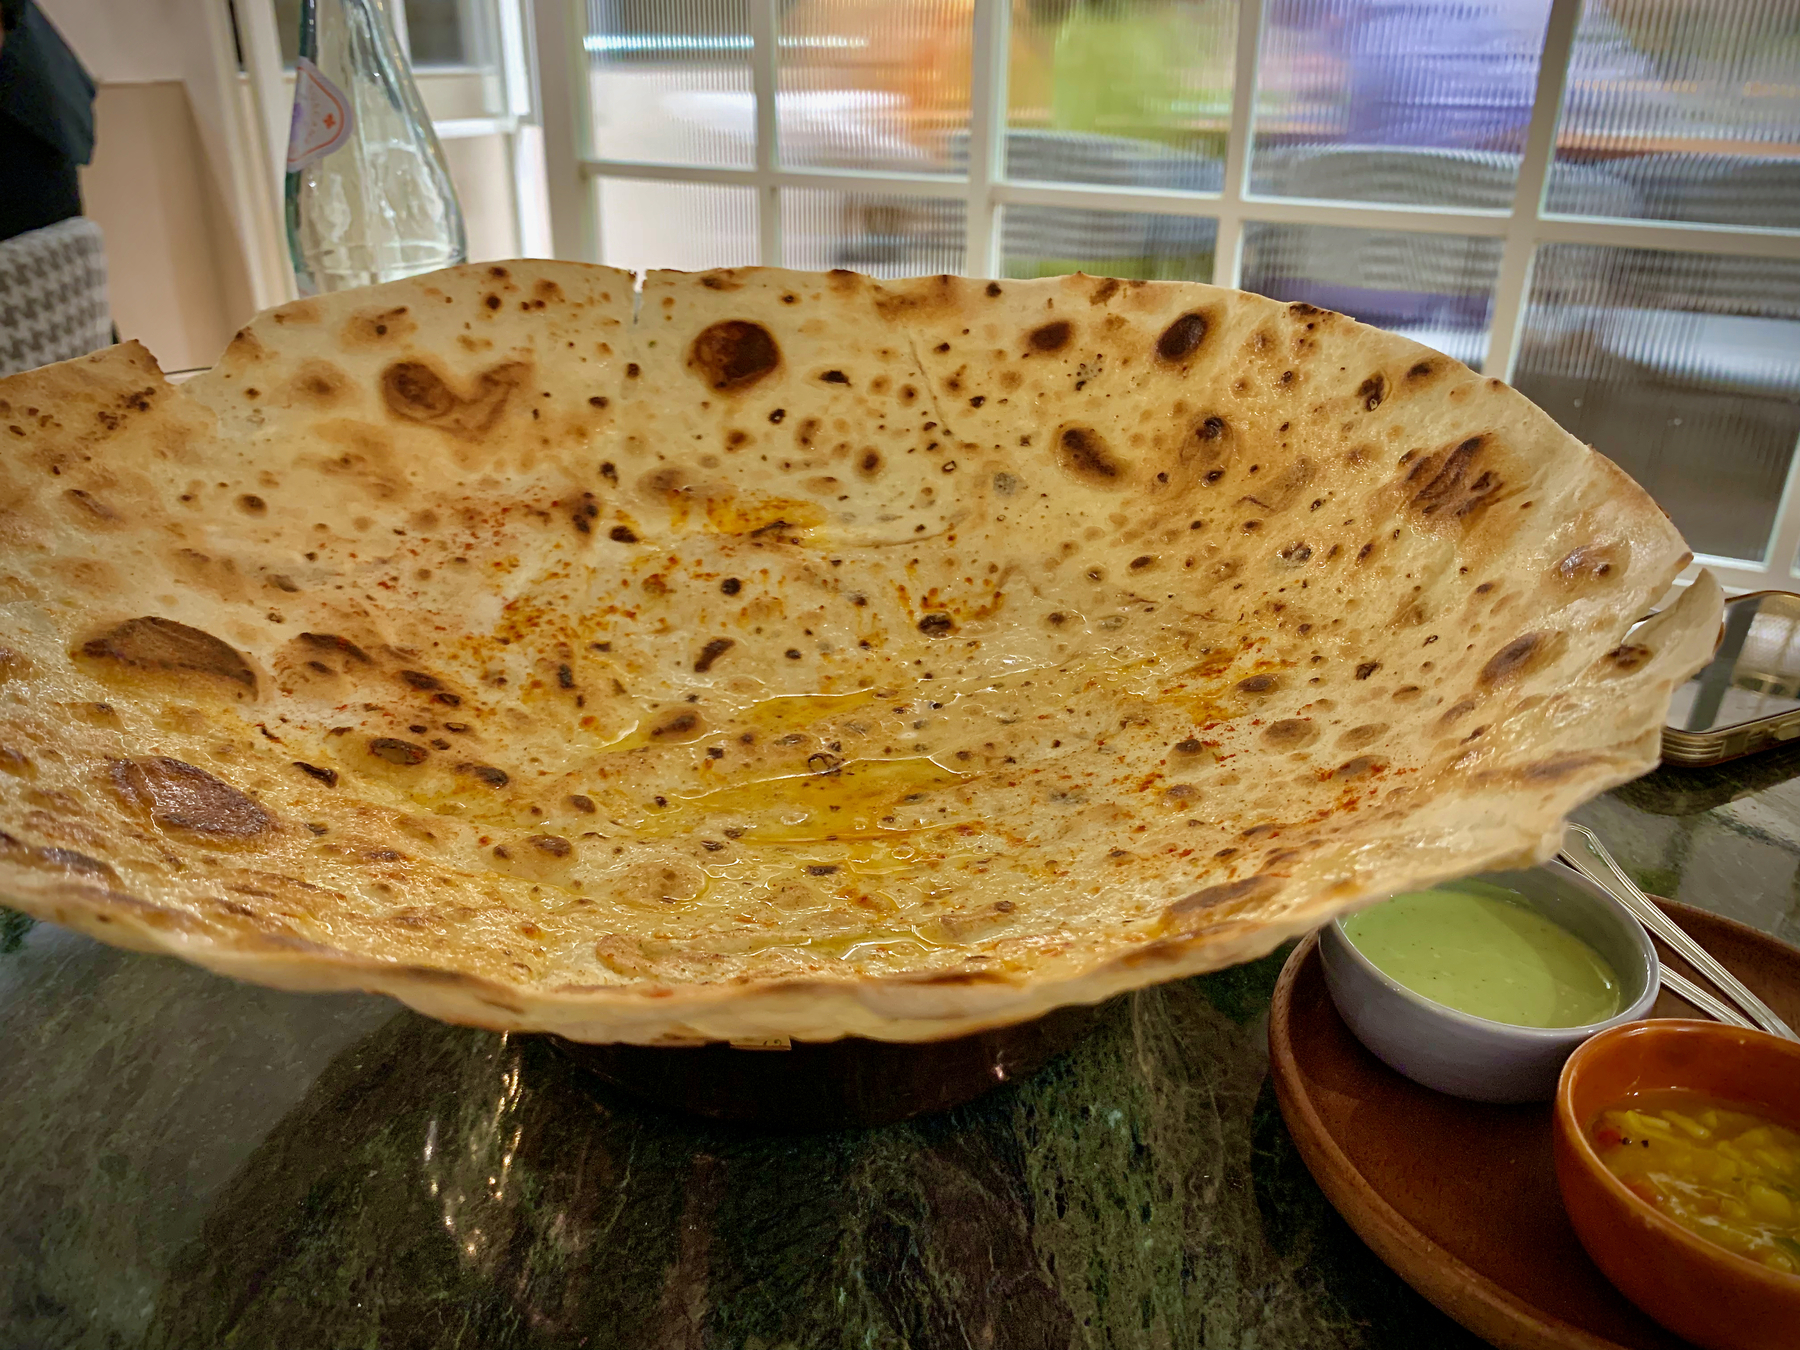 Kadak Roomali Roti, a crisp wafer thin bread topped with melted butter and spice powders.